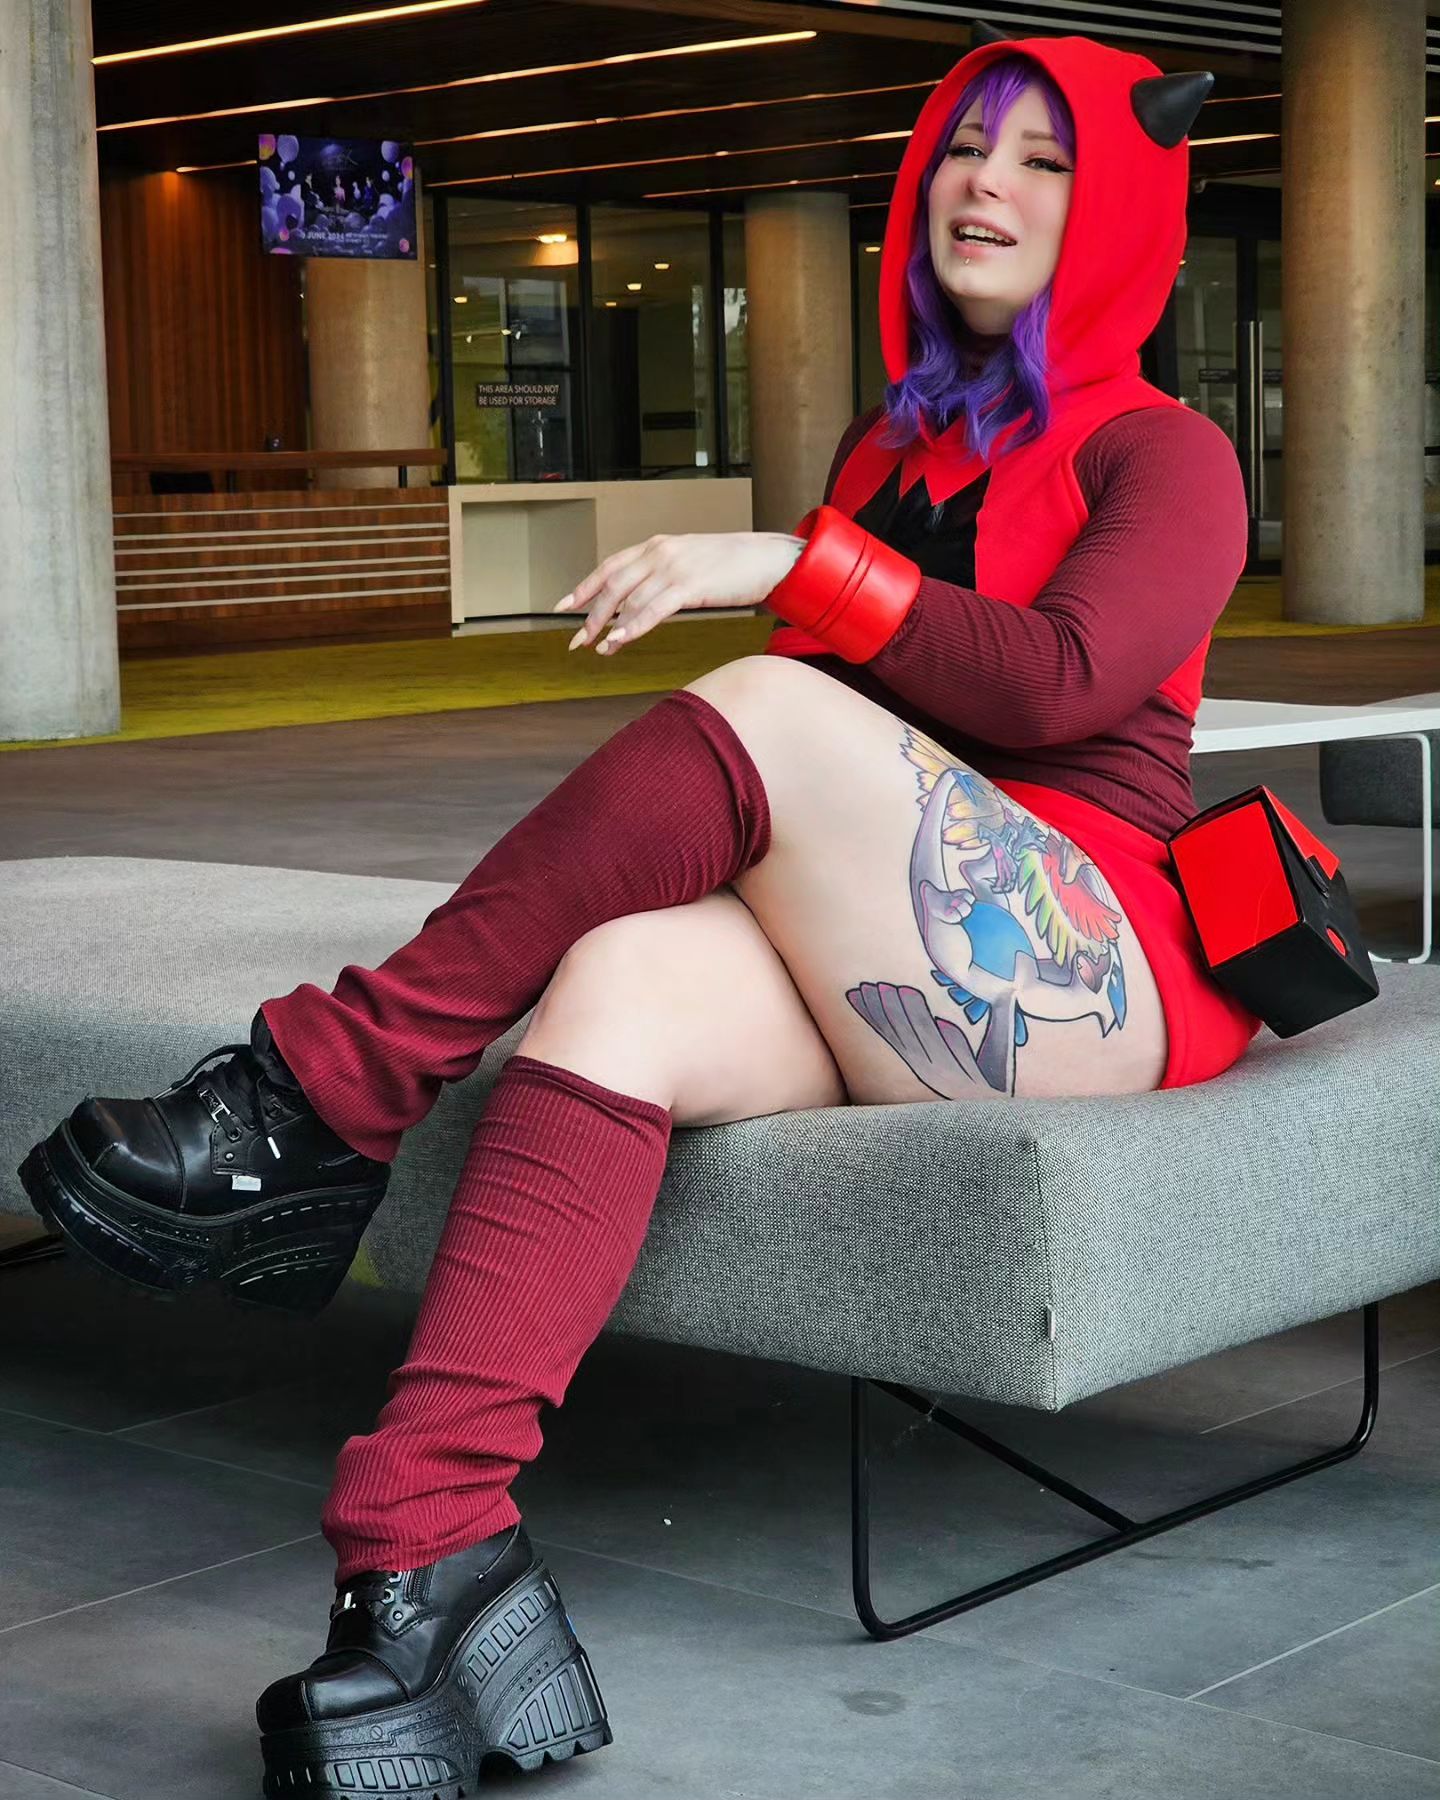 I had a very Pokémon weekend at @generationgamesaus
Magma Grunt is my comfiest cosplay, I feel like such a gremlin in it 🤣
And I don't remember what @fifty_face_jayce said while he was taking these photos but it was funny apparently 🤣
.
.
#teammagma #teammagmagrunt #magmagrunt #pokemon #teammagmacosplay #teammagmagruntcosplay #magmagruntcosplay #pokemoncosplay